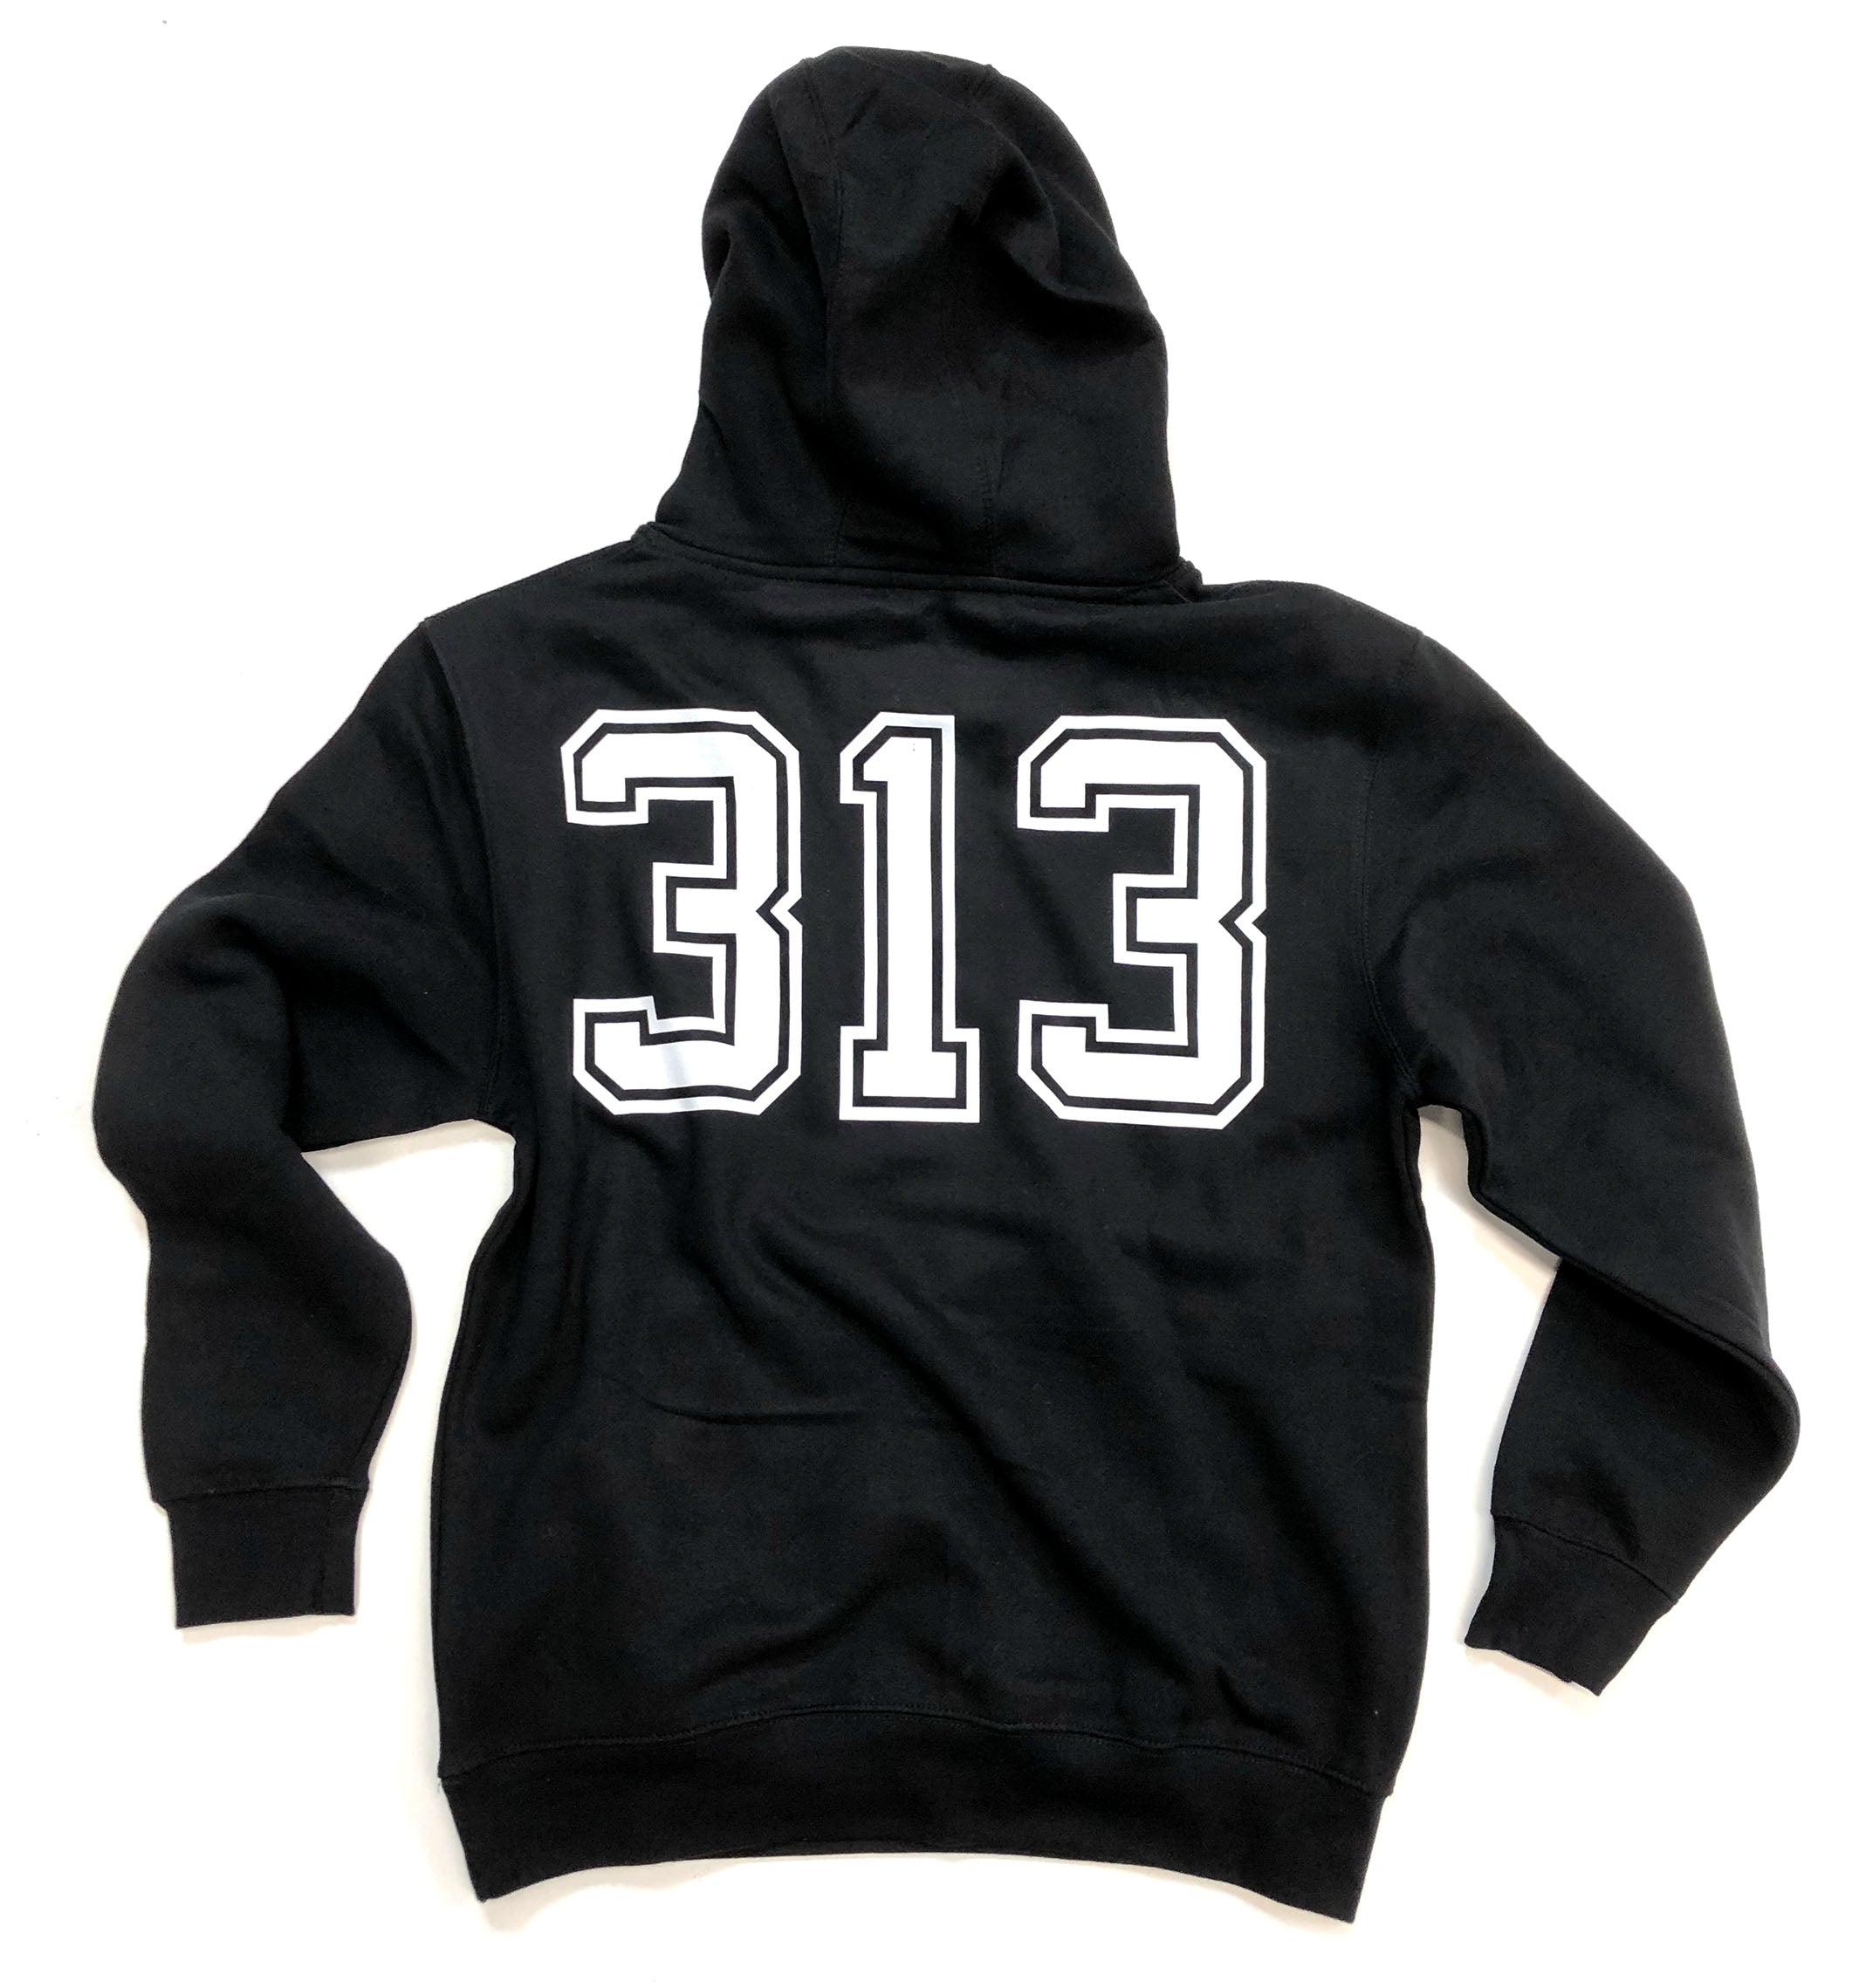 Eastern Market Unisex Pullover Hoodie, Well Done Goods